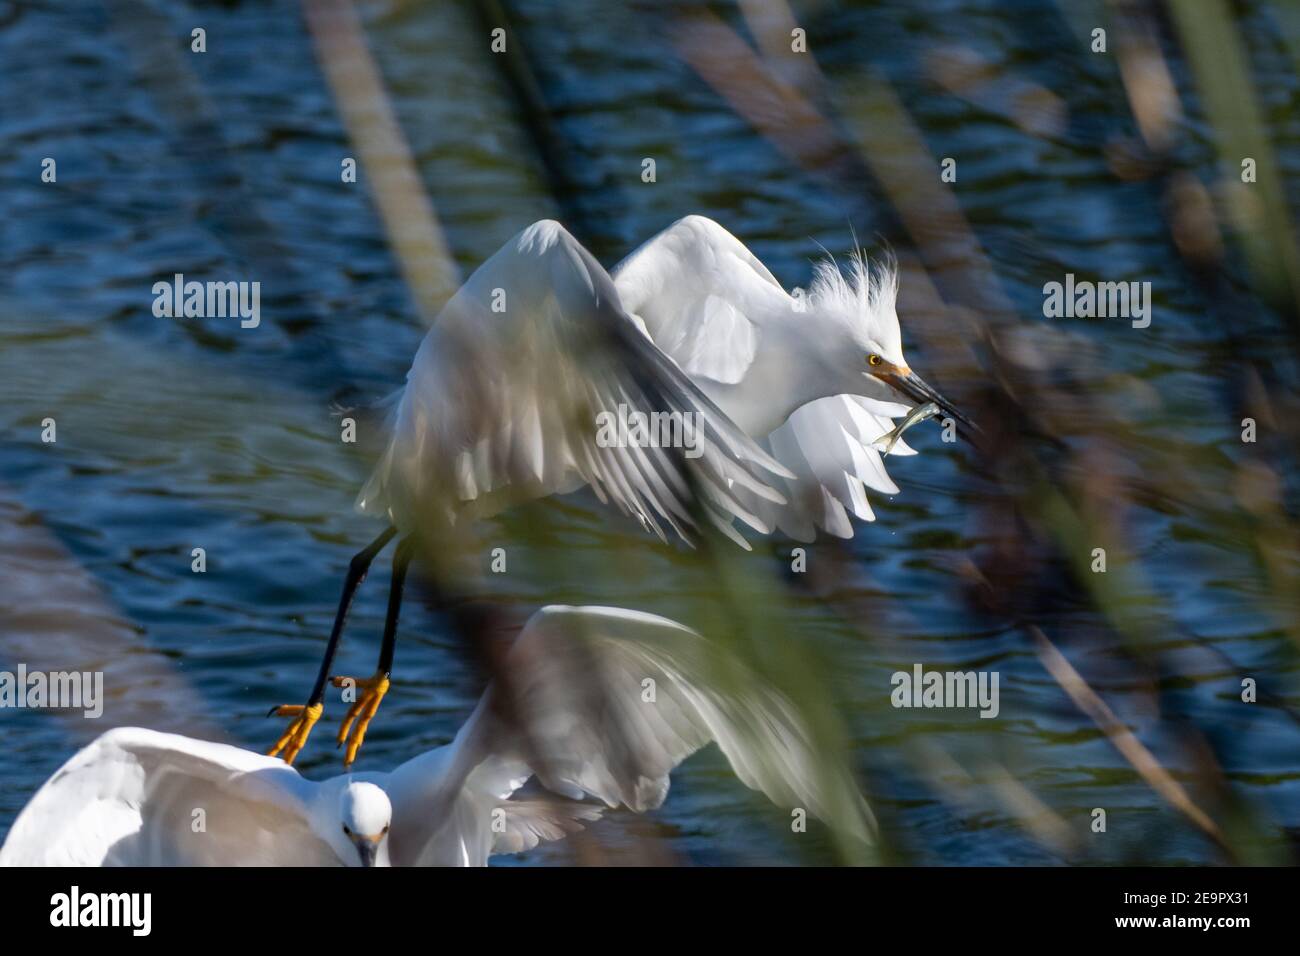 Sunny winter day in Ventura as the Snowy White Egret flies through the pond reeds with a prized catch of fish in its beak. Stock Photo